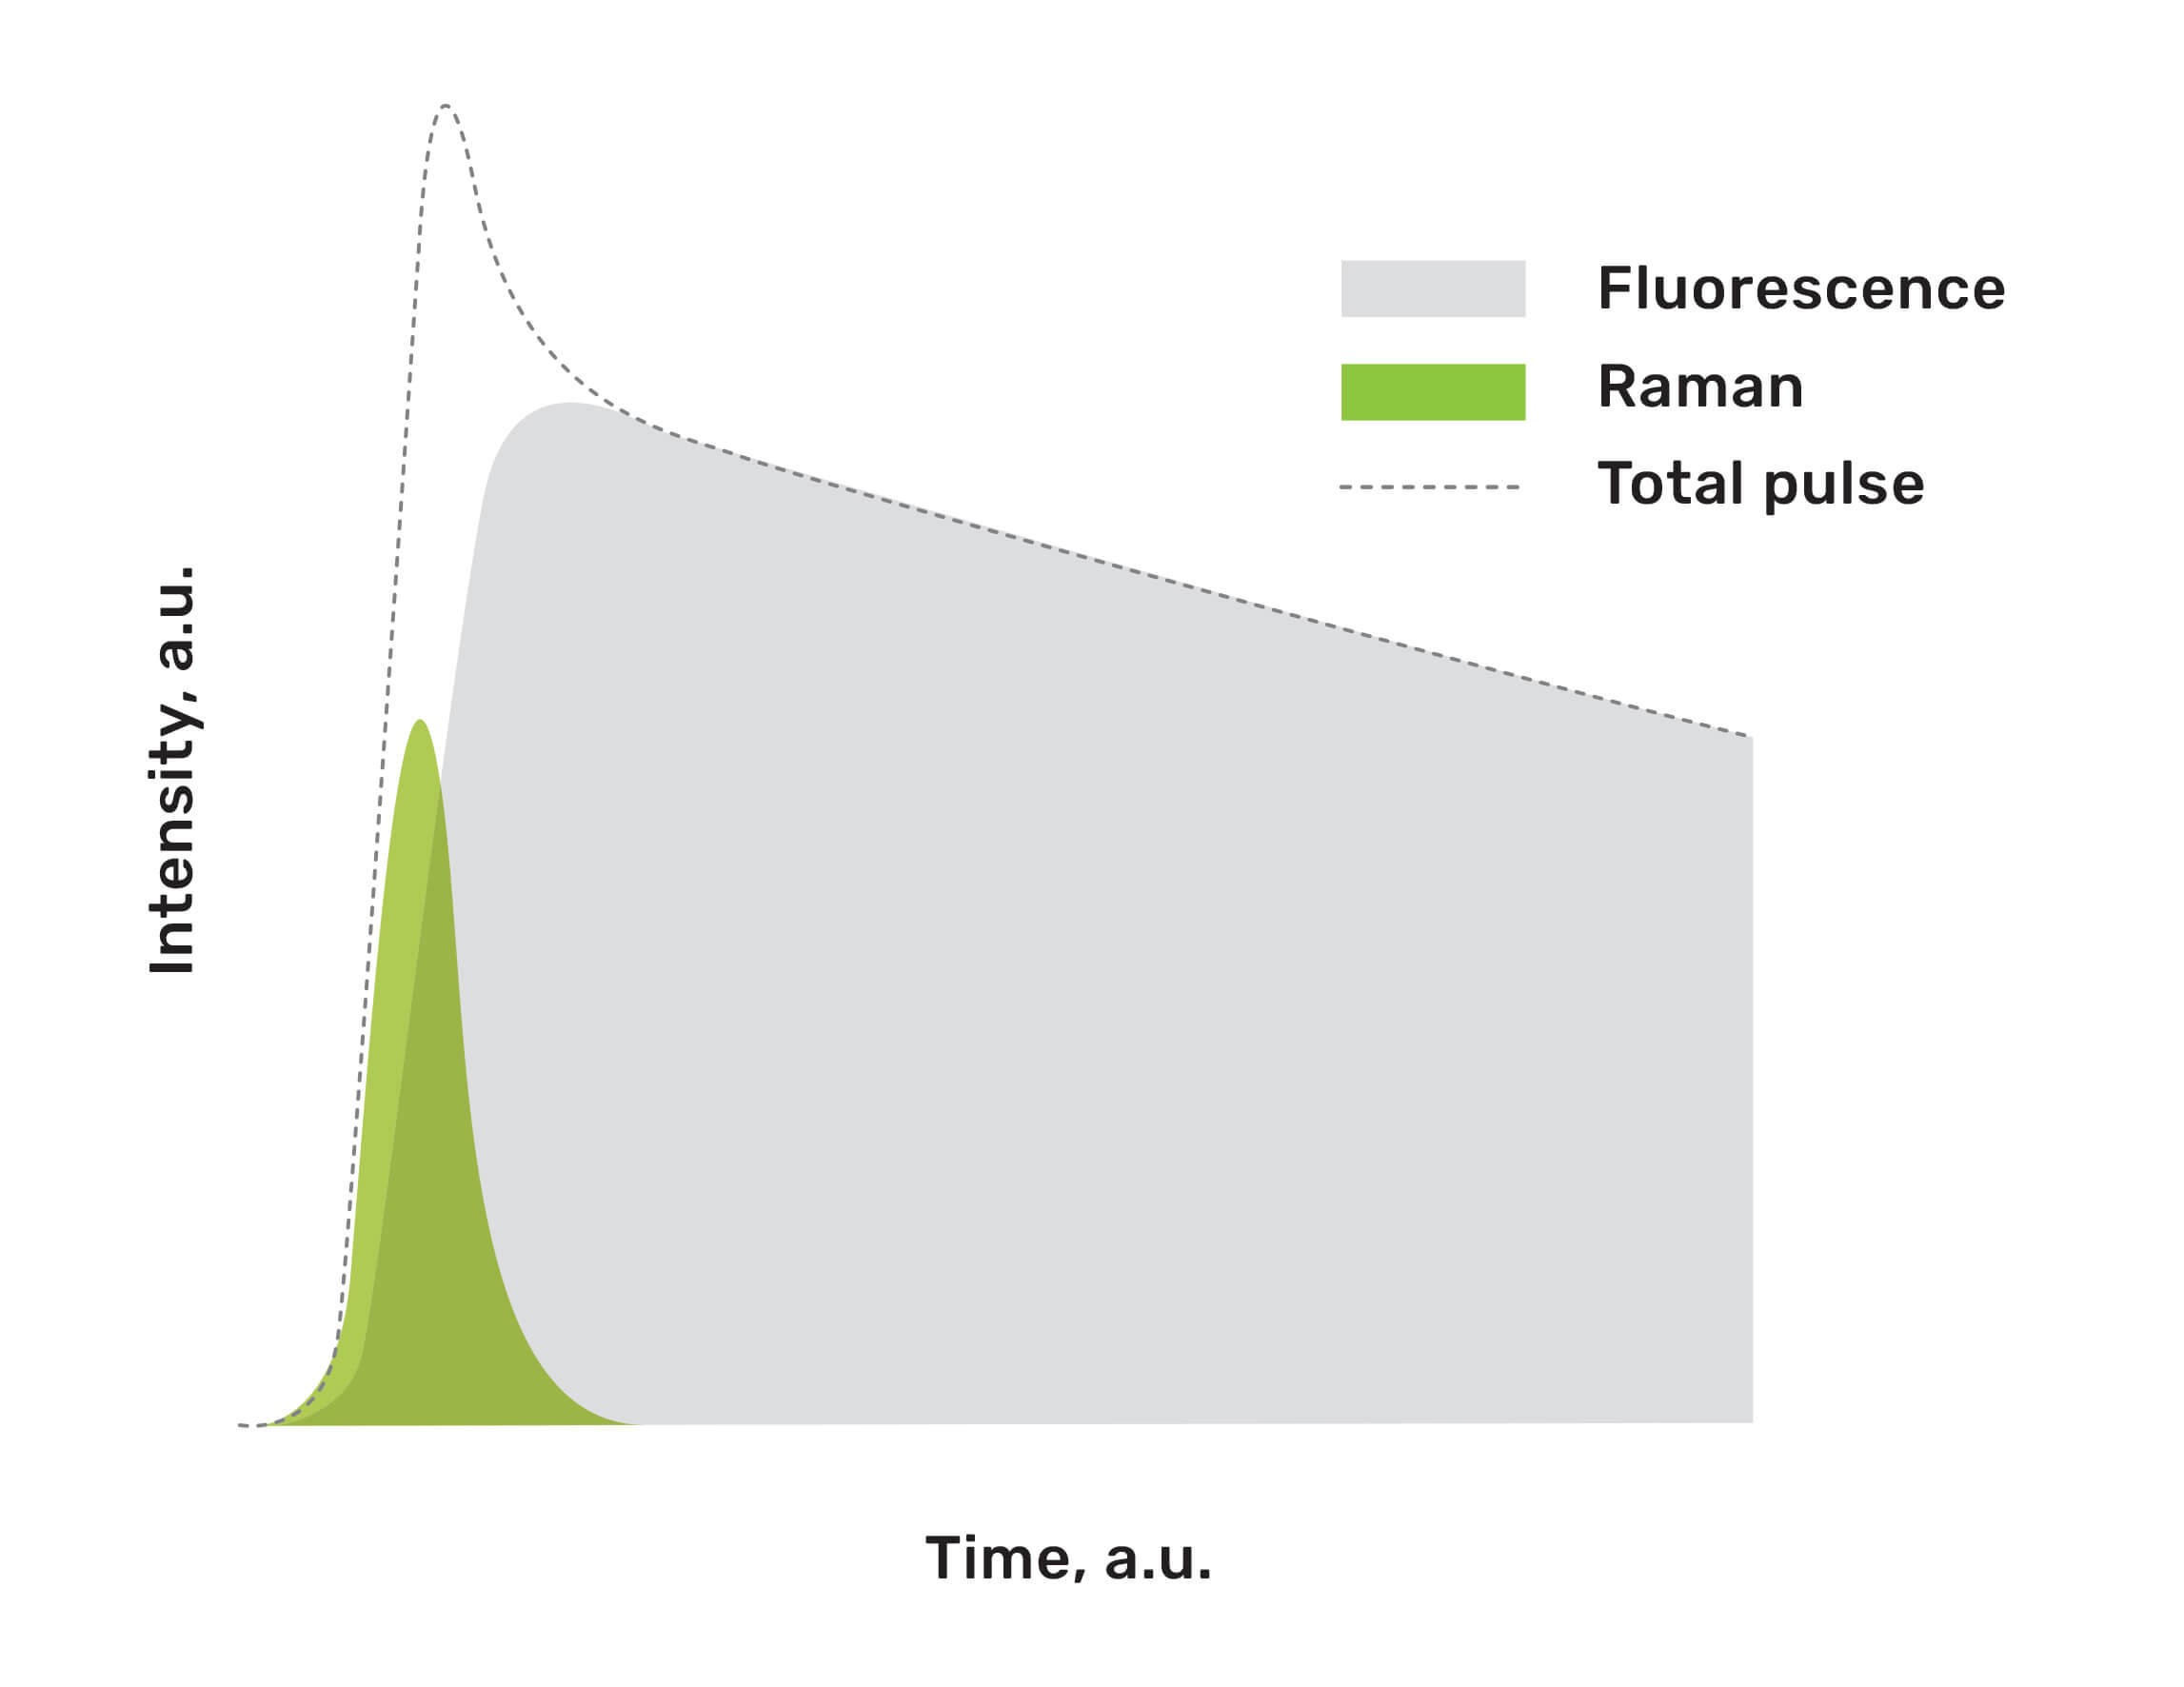 Spectra illustrating the time-gated Raman laser pulse and fluorescence interference.